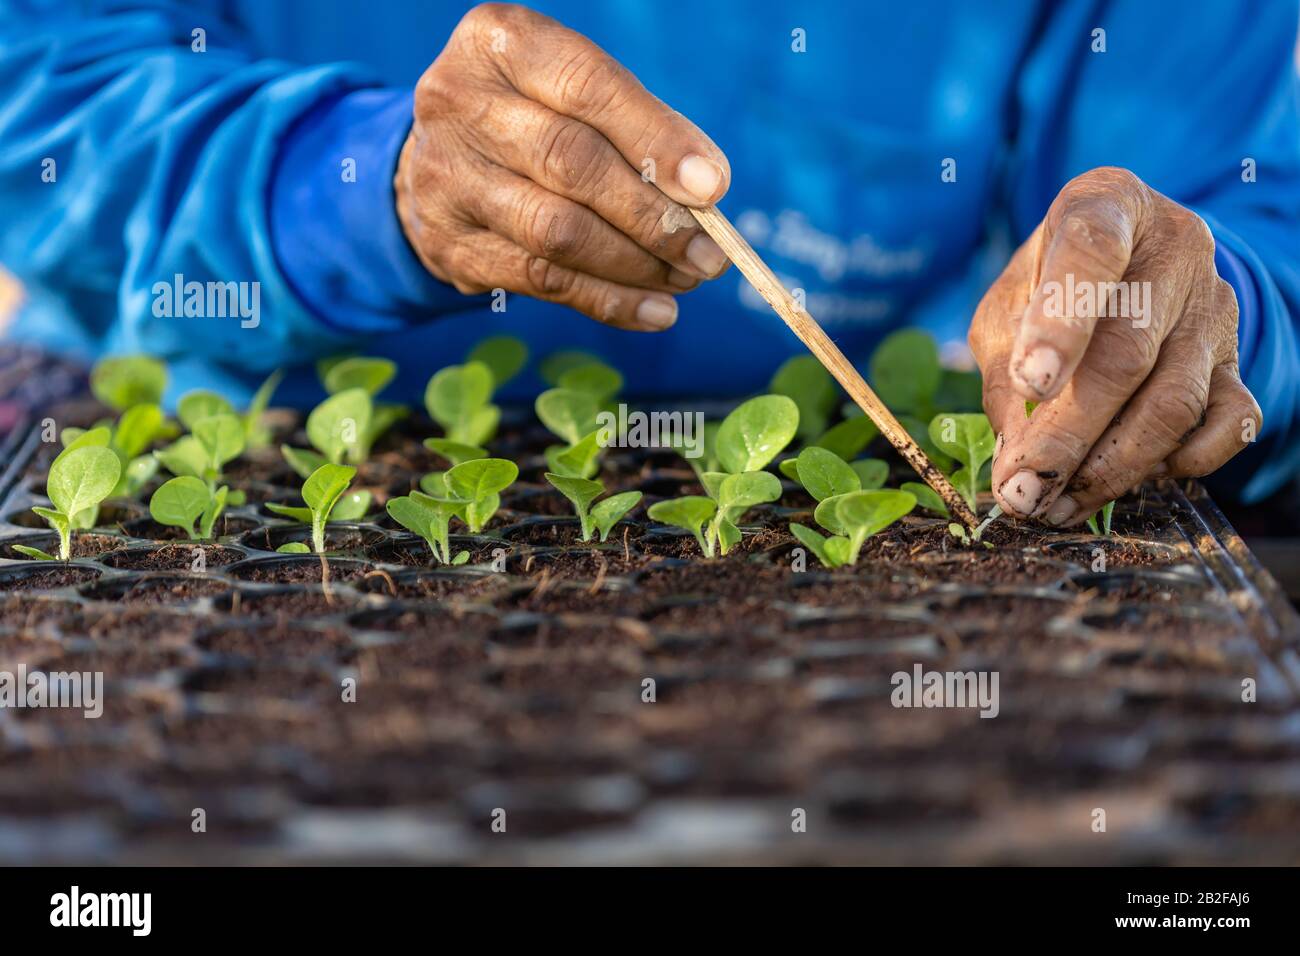 Farmer or agriculturist put the young of tobacco tree in black plastic seedling tray Stock Photo